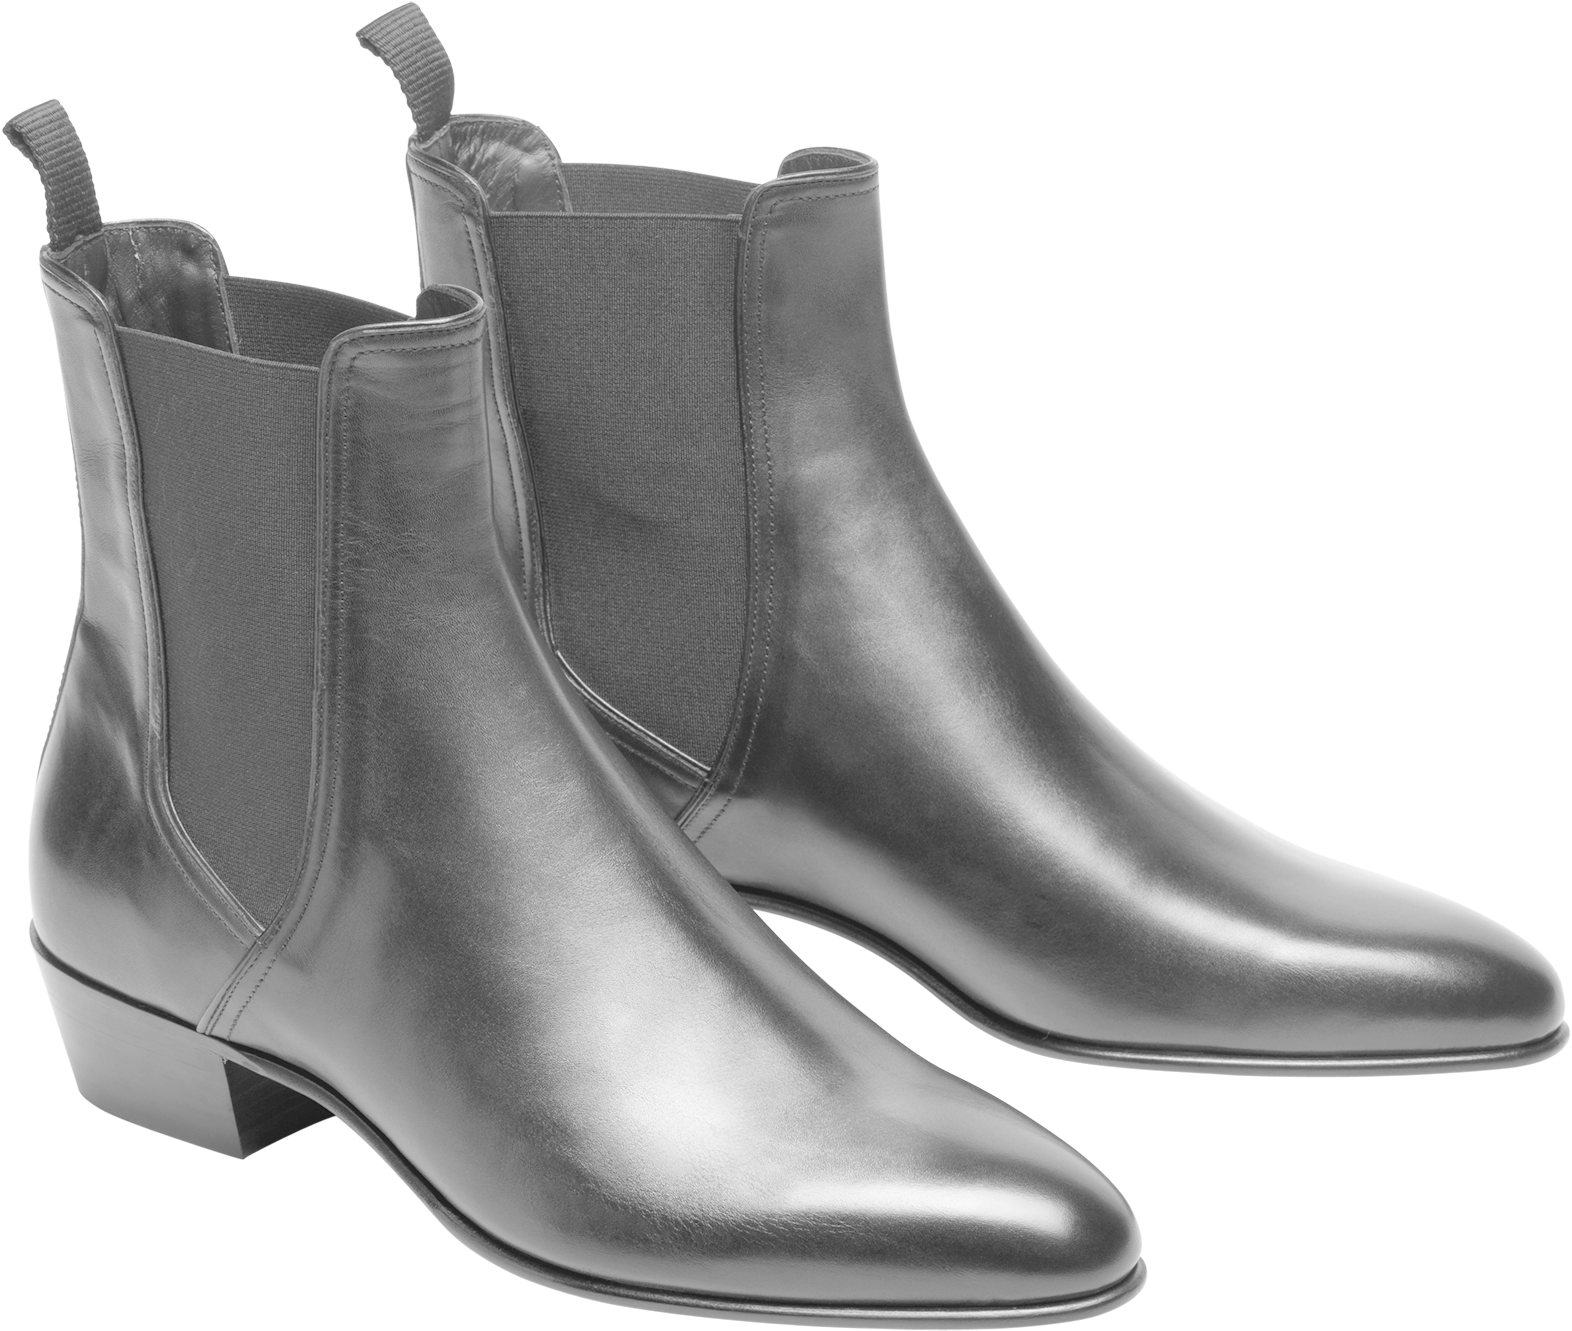 Silver Ankle Boots PNG